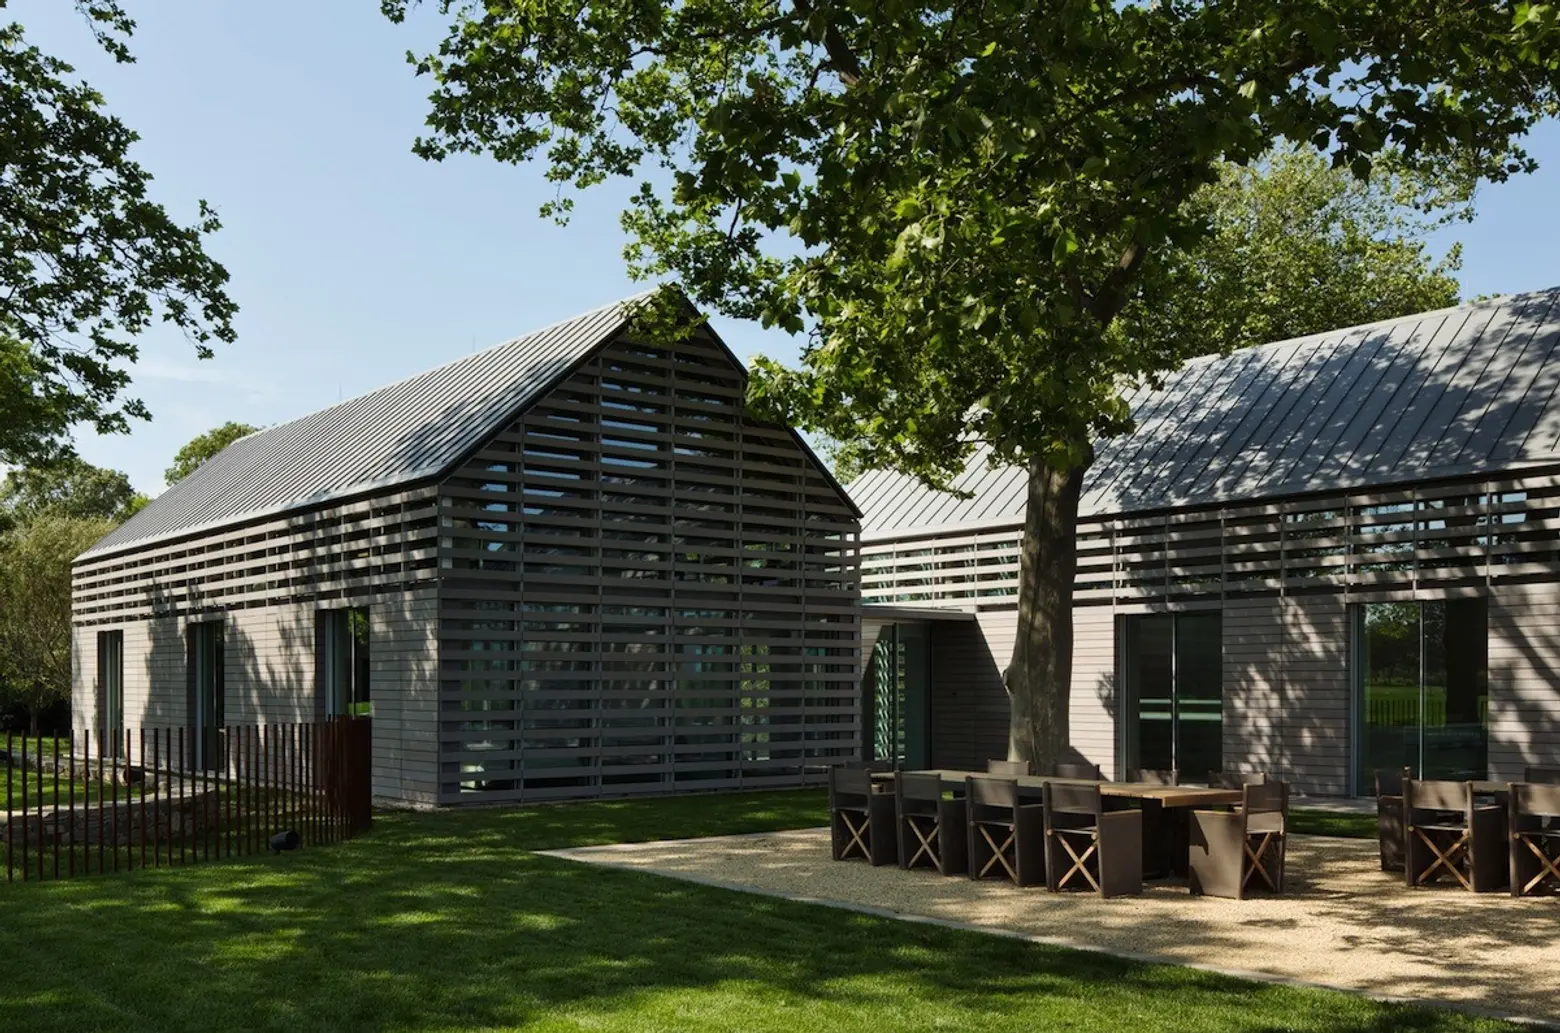 Wood slat-covered glass volumes create an elegant interior at this Hamptons guest home